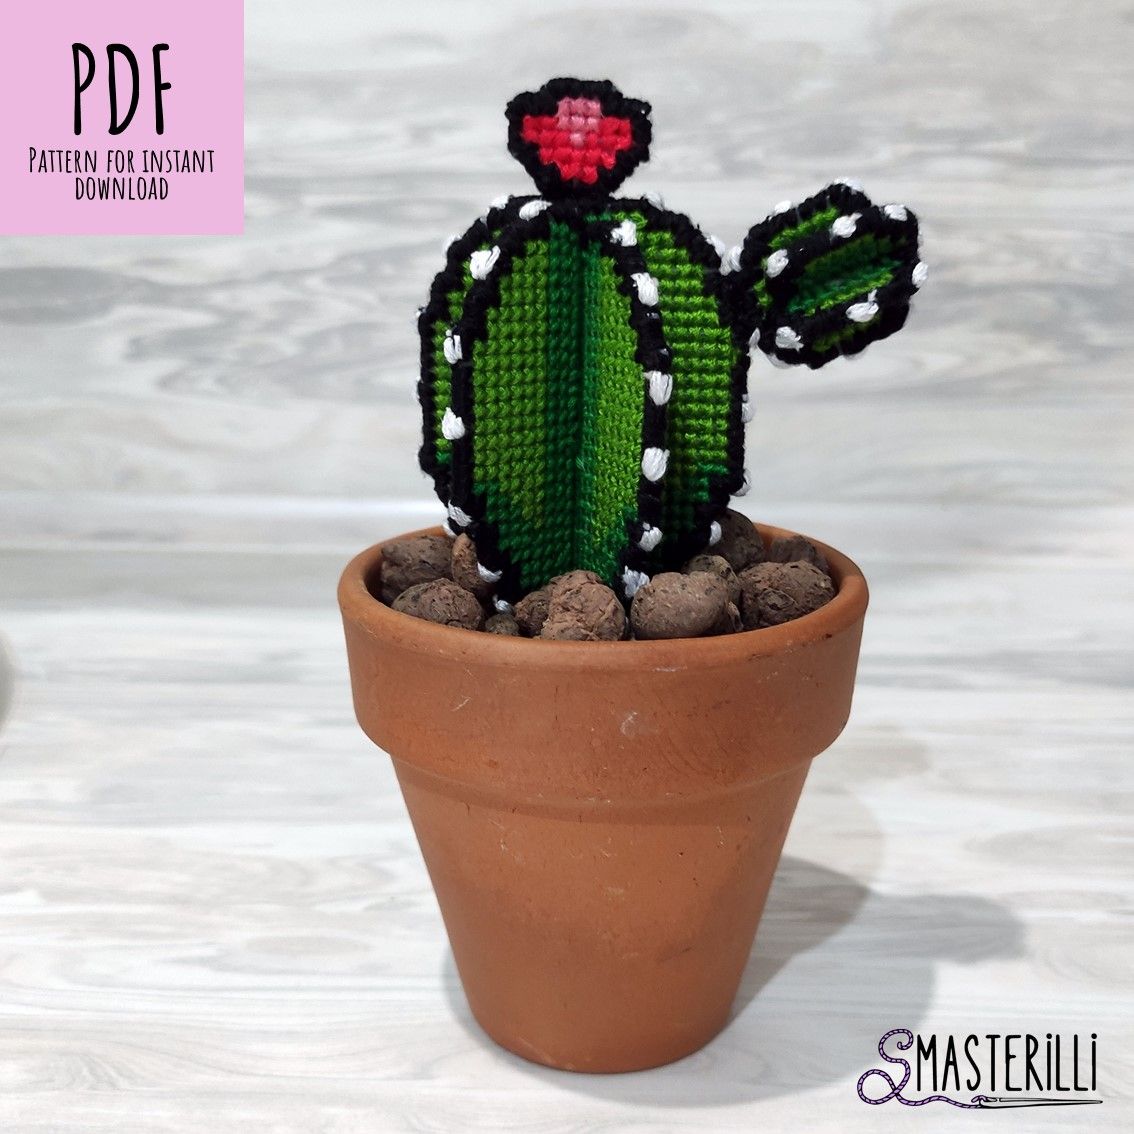 Cross stitch pattern of a potted cactus for plastic canvas